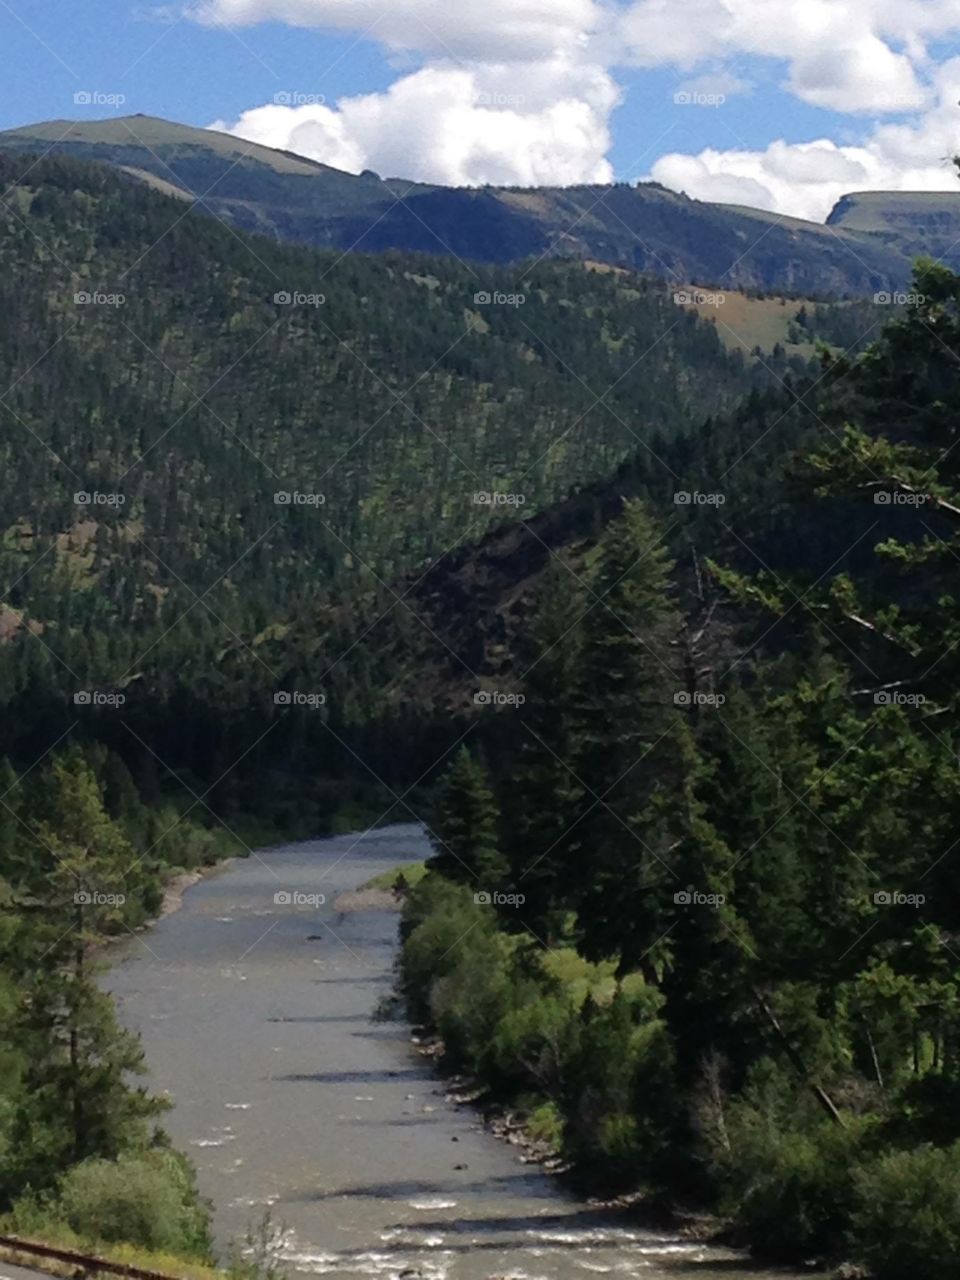 Mountains hills with river in Wapiti, Wyoming.